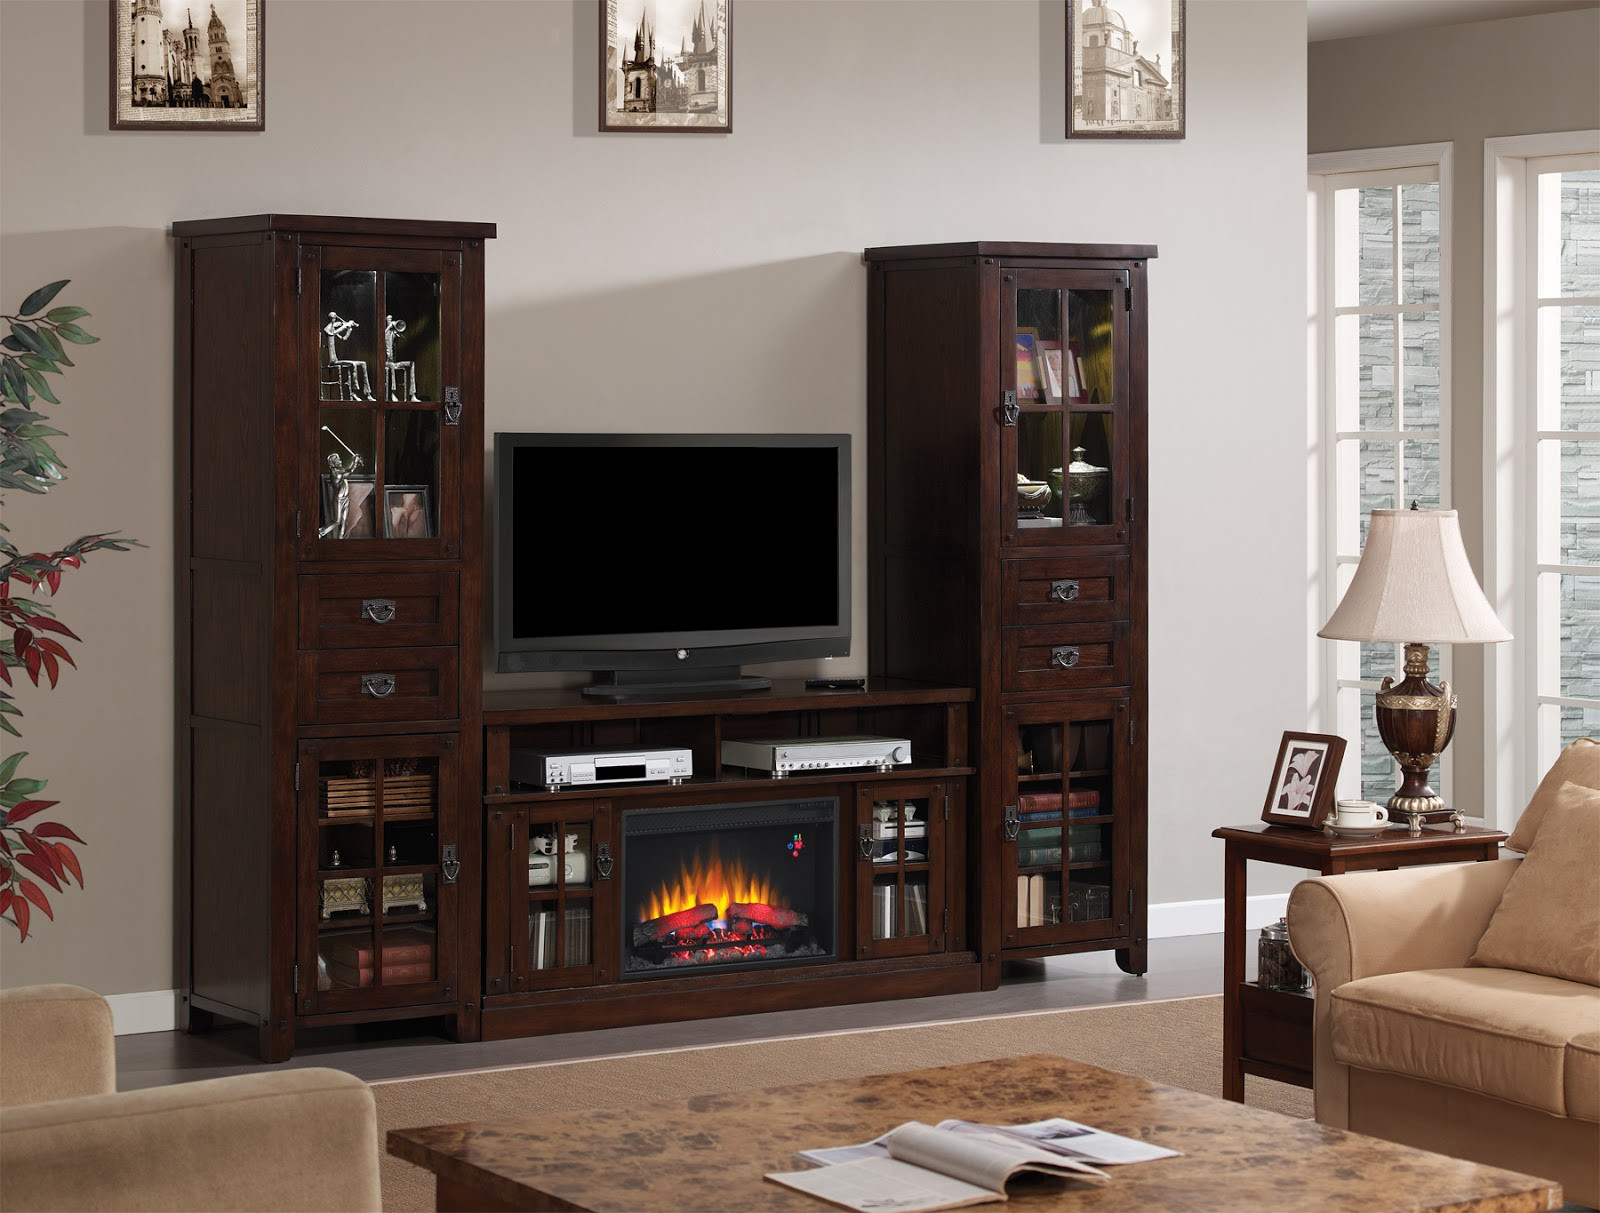 Electric Fireplace Entertainment Center Lowes
 Ideas Best Electric Fireplaces At Lowes For Living Room